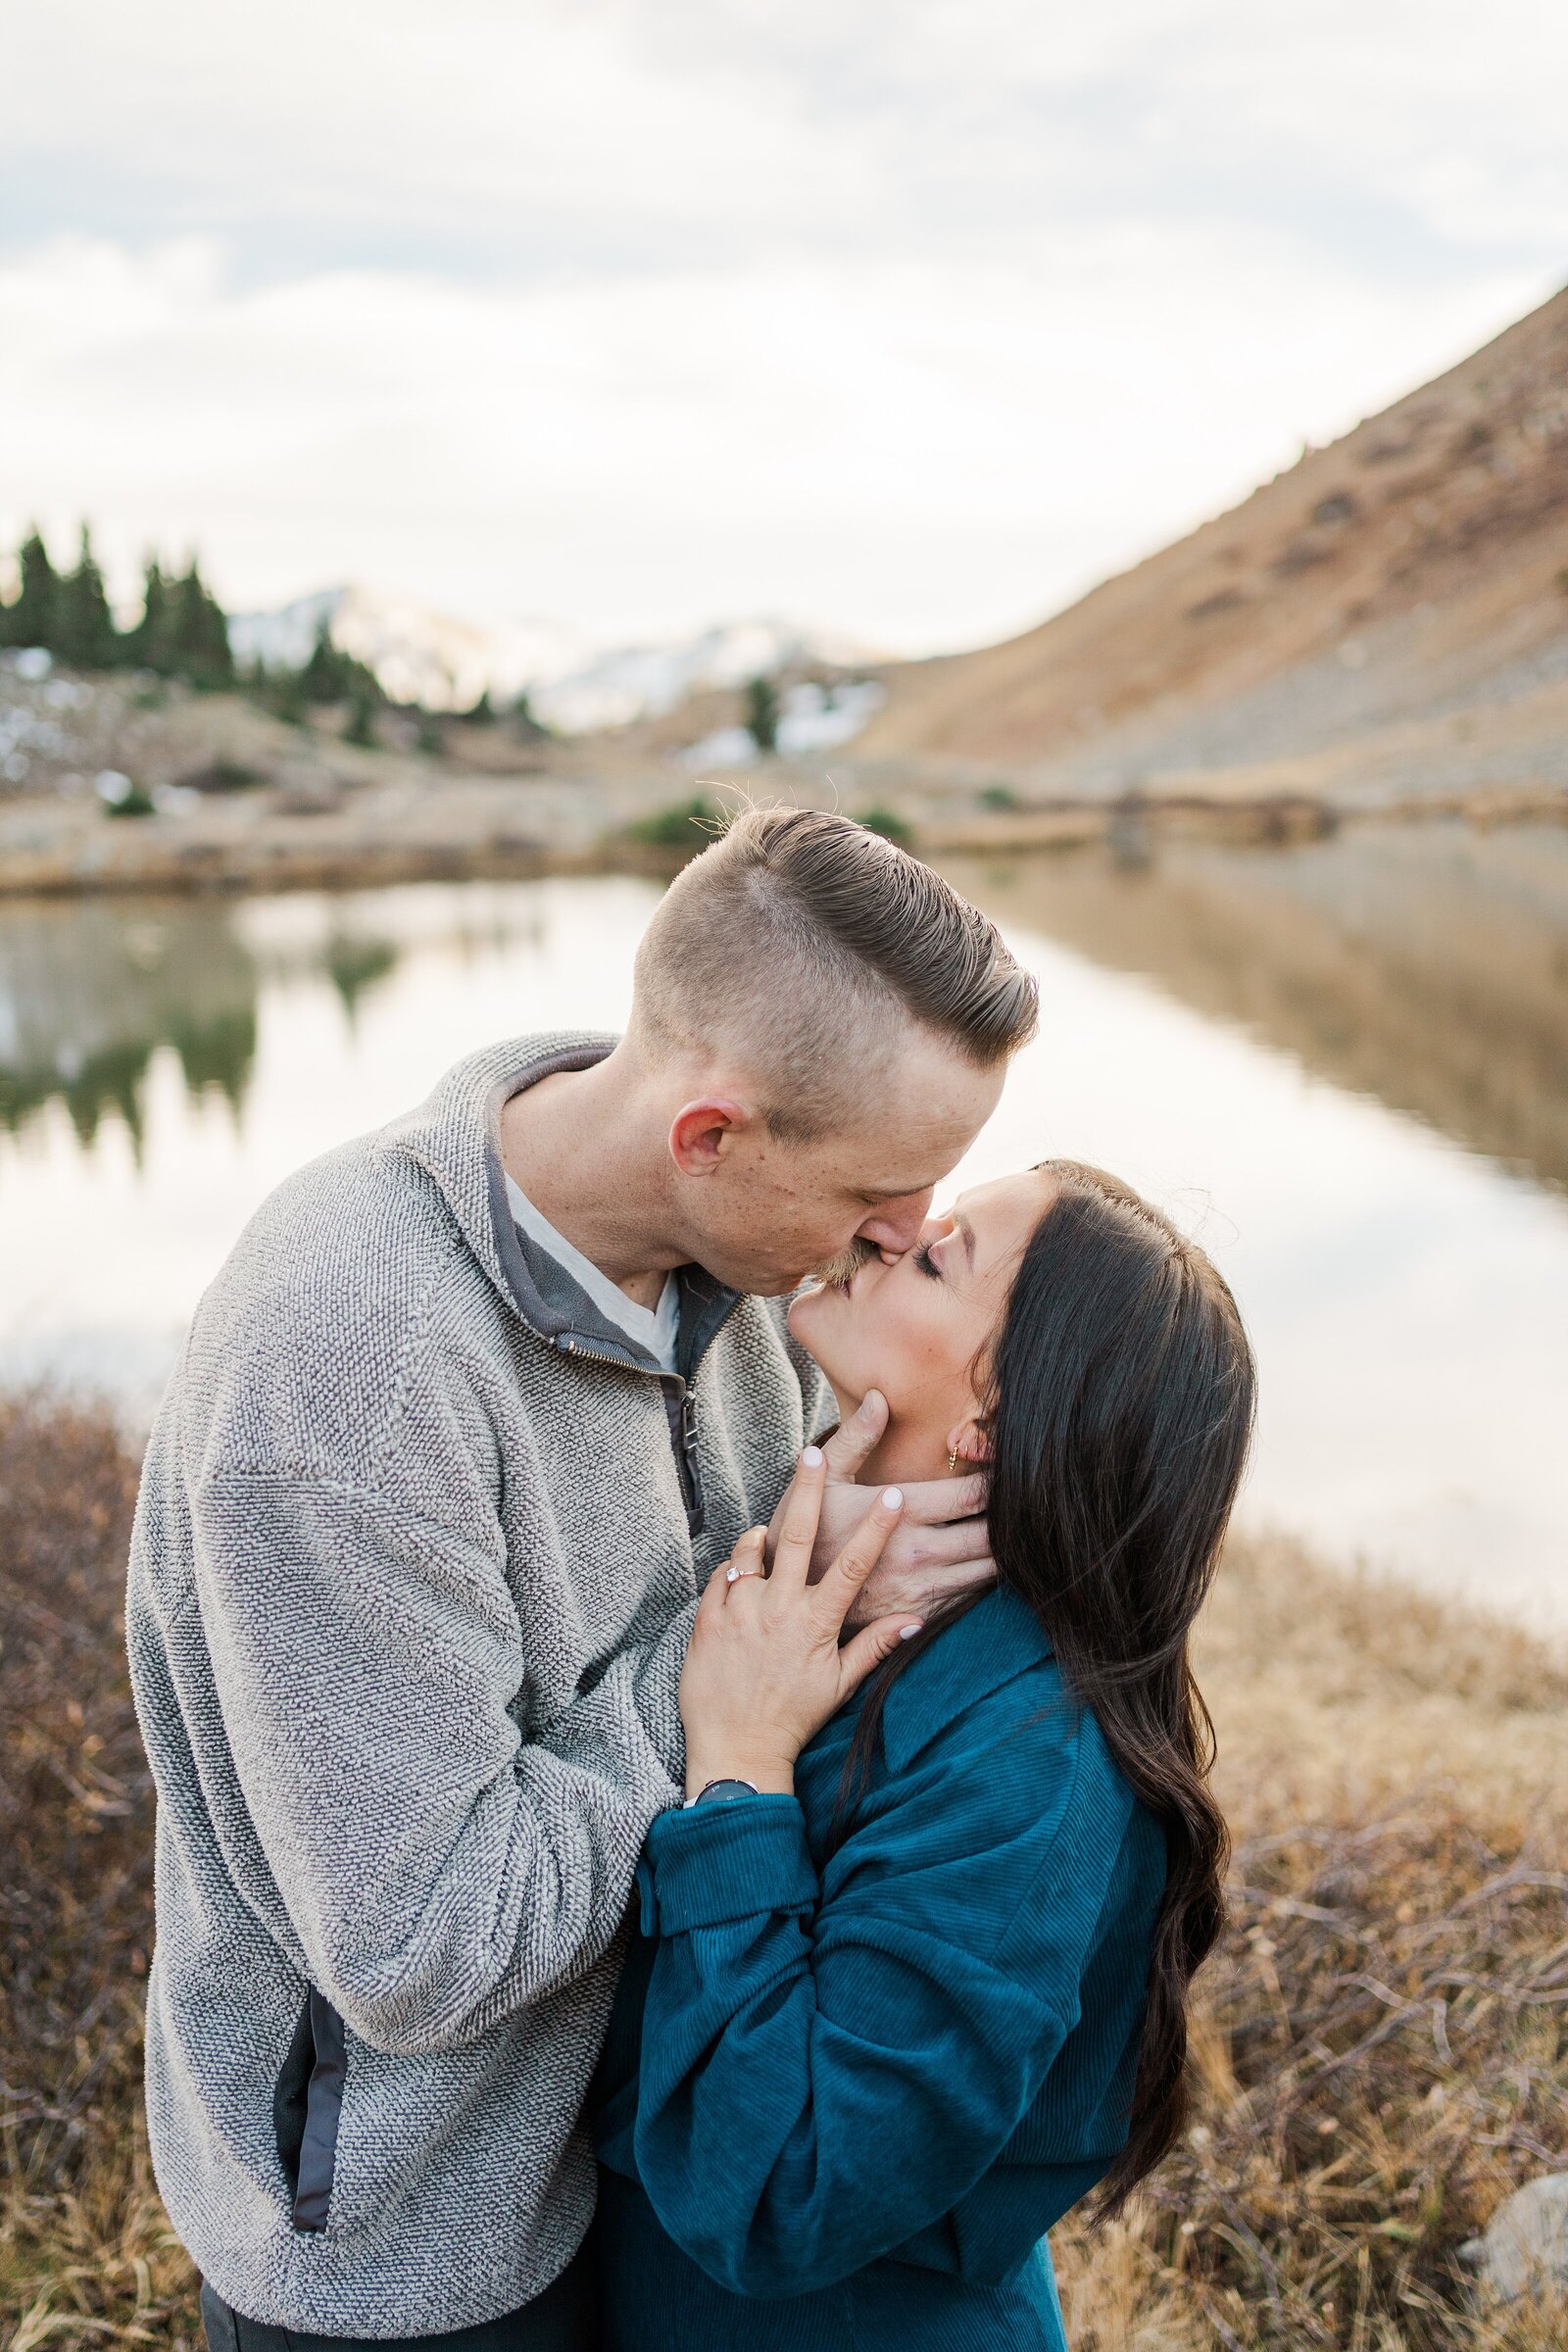 Let's embark on an epic adventure together with Samantha Immer Photography, your trusted hiking elopement photographer in Colorado. We'll hike to breathtaking vistas and capture your love story in the great outdoors.